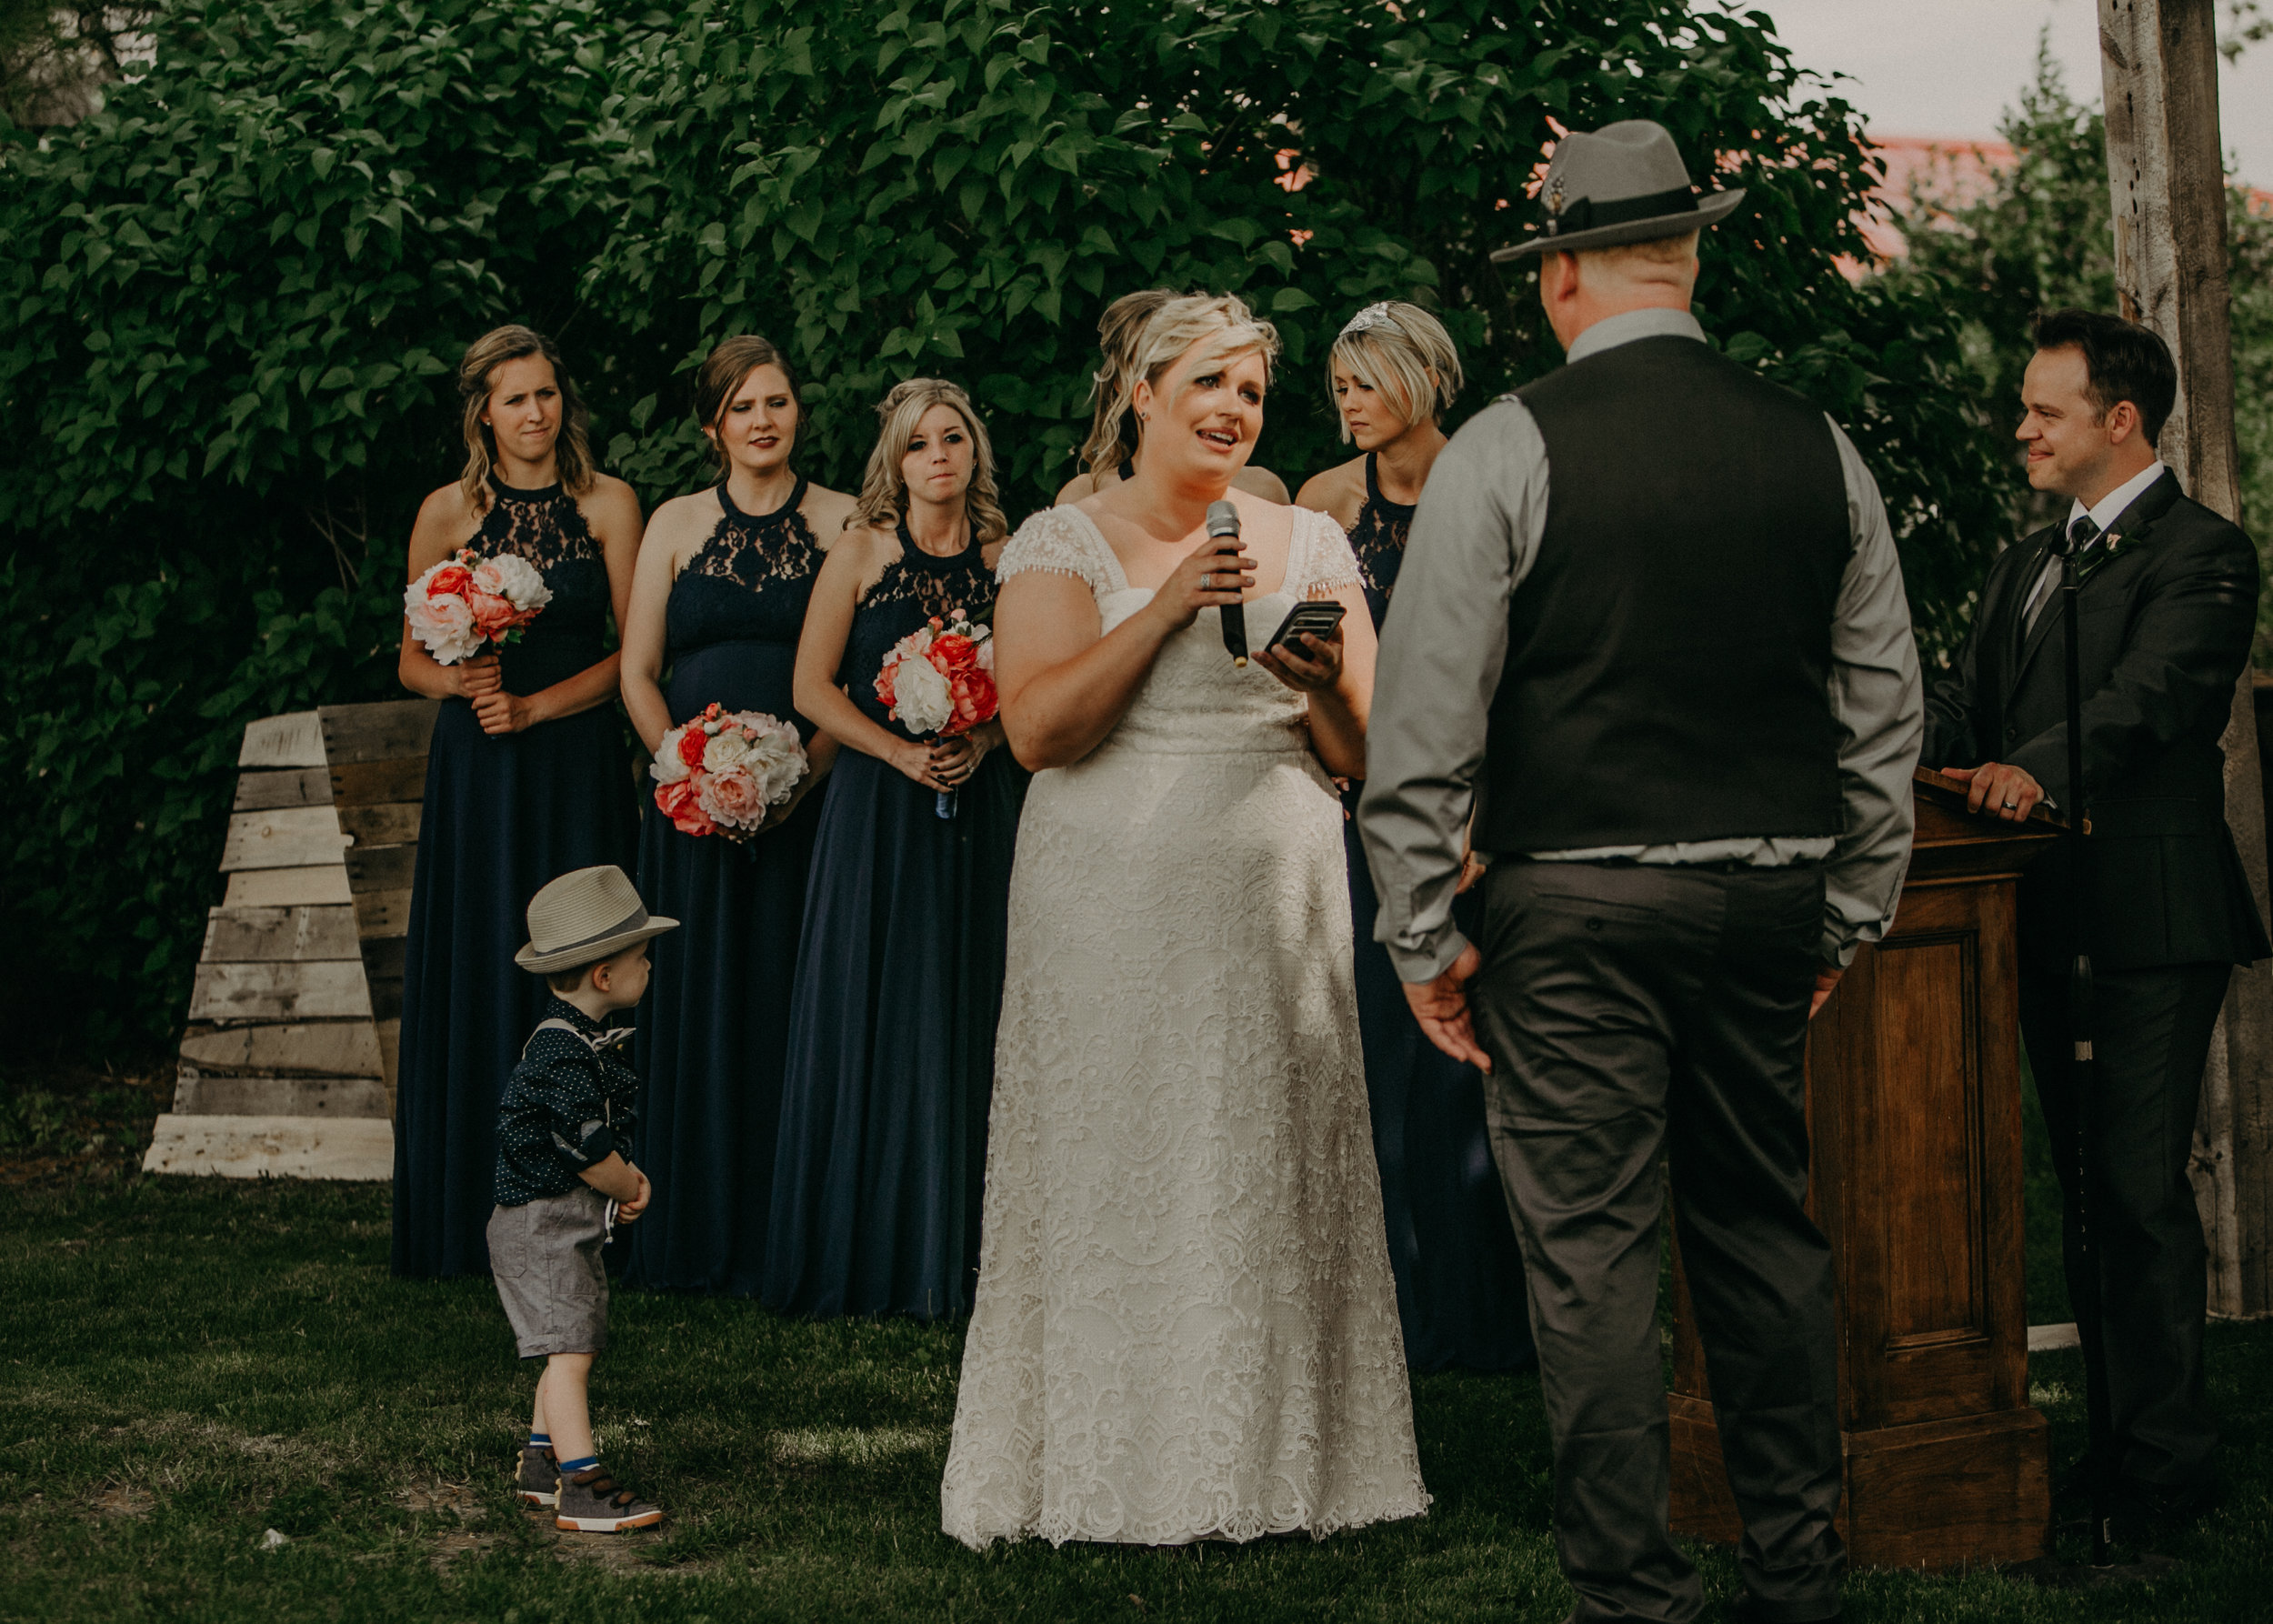  emotion caught on camera by Andrea Wagner Photography during wedding at Jean Acres Barn in Ellsworth WI 